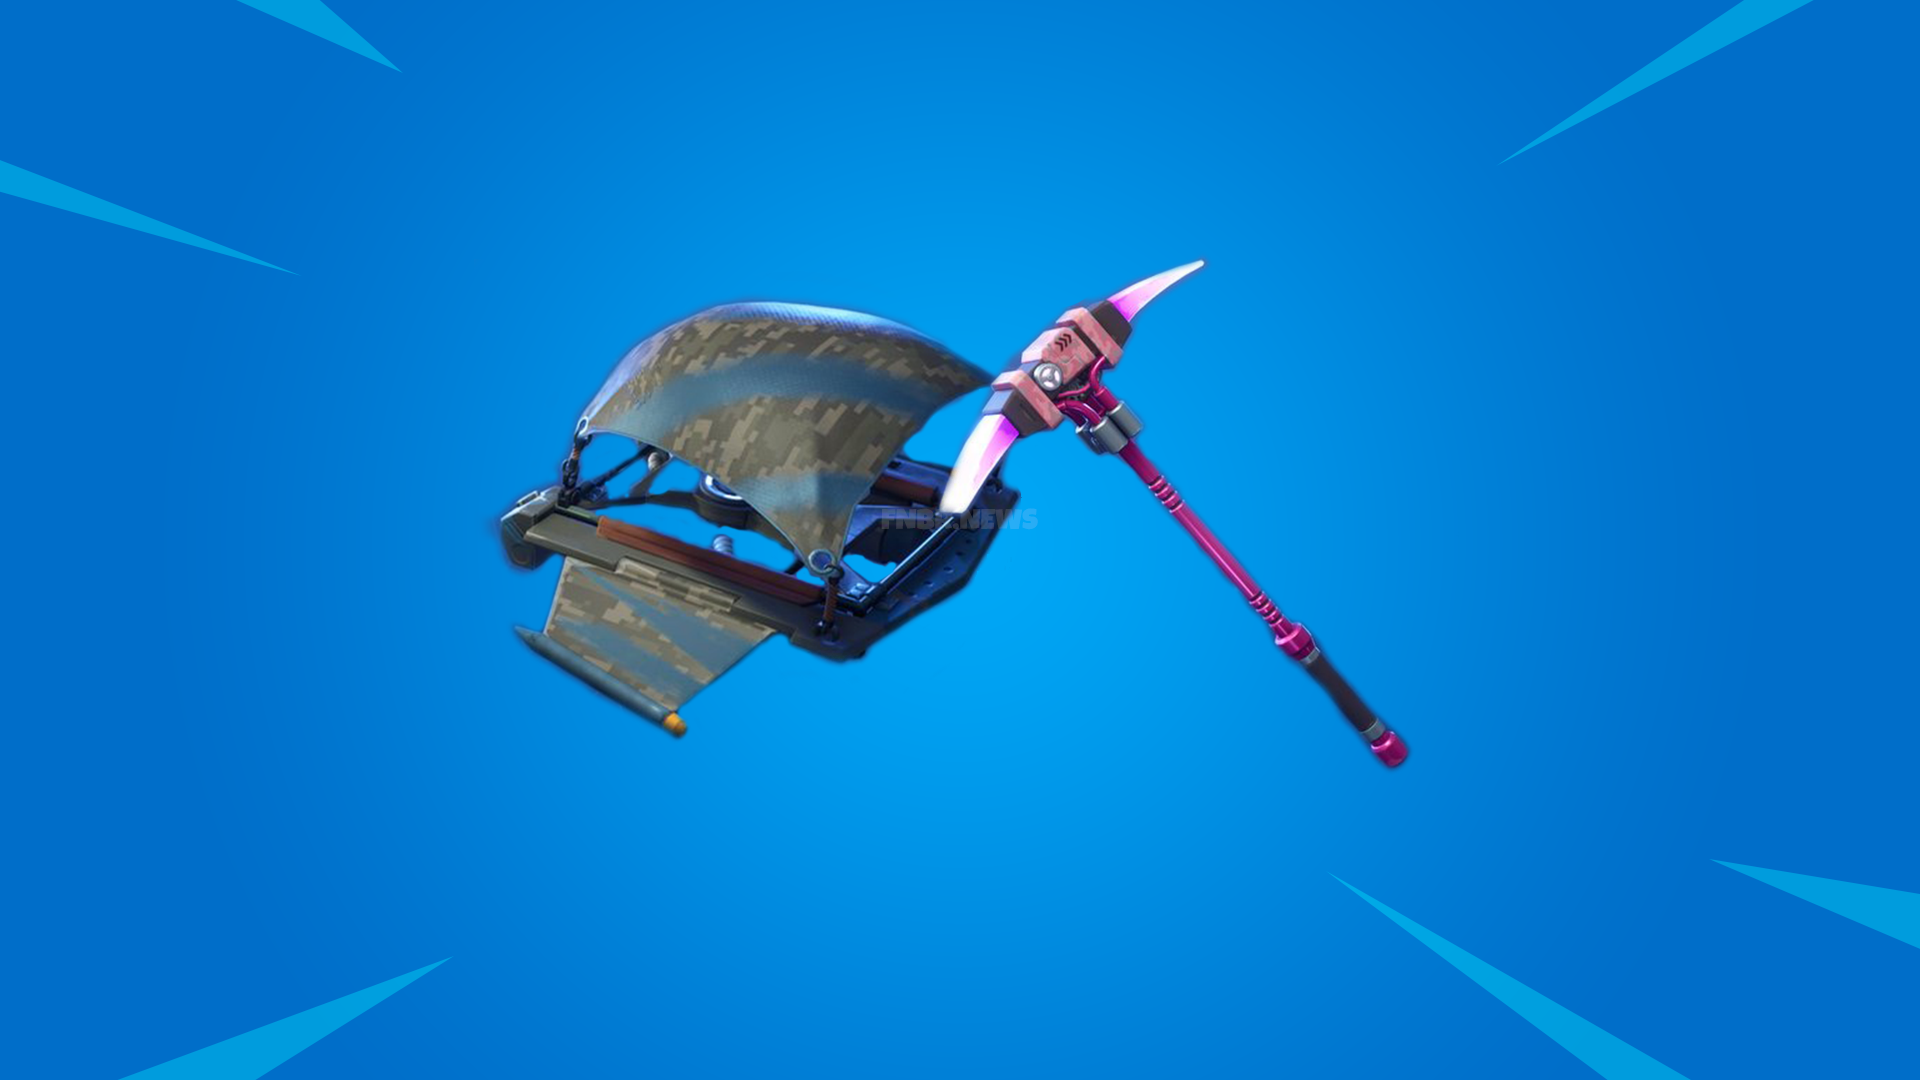 leak more battle royale rewards for save the world founders coming to fortnite - how to get pickaxes in fortnite save the world